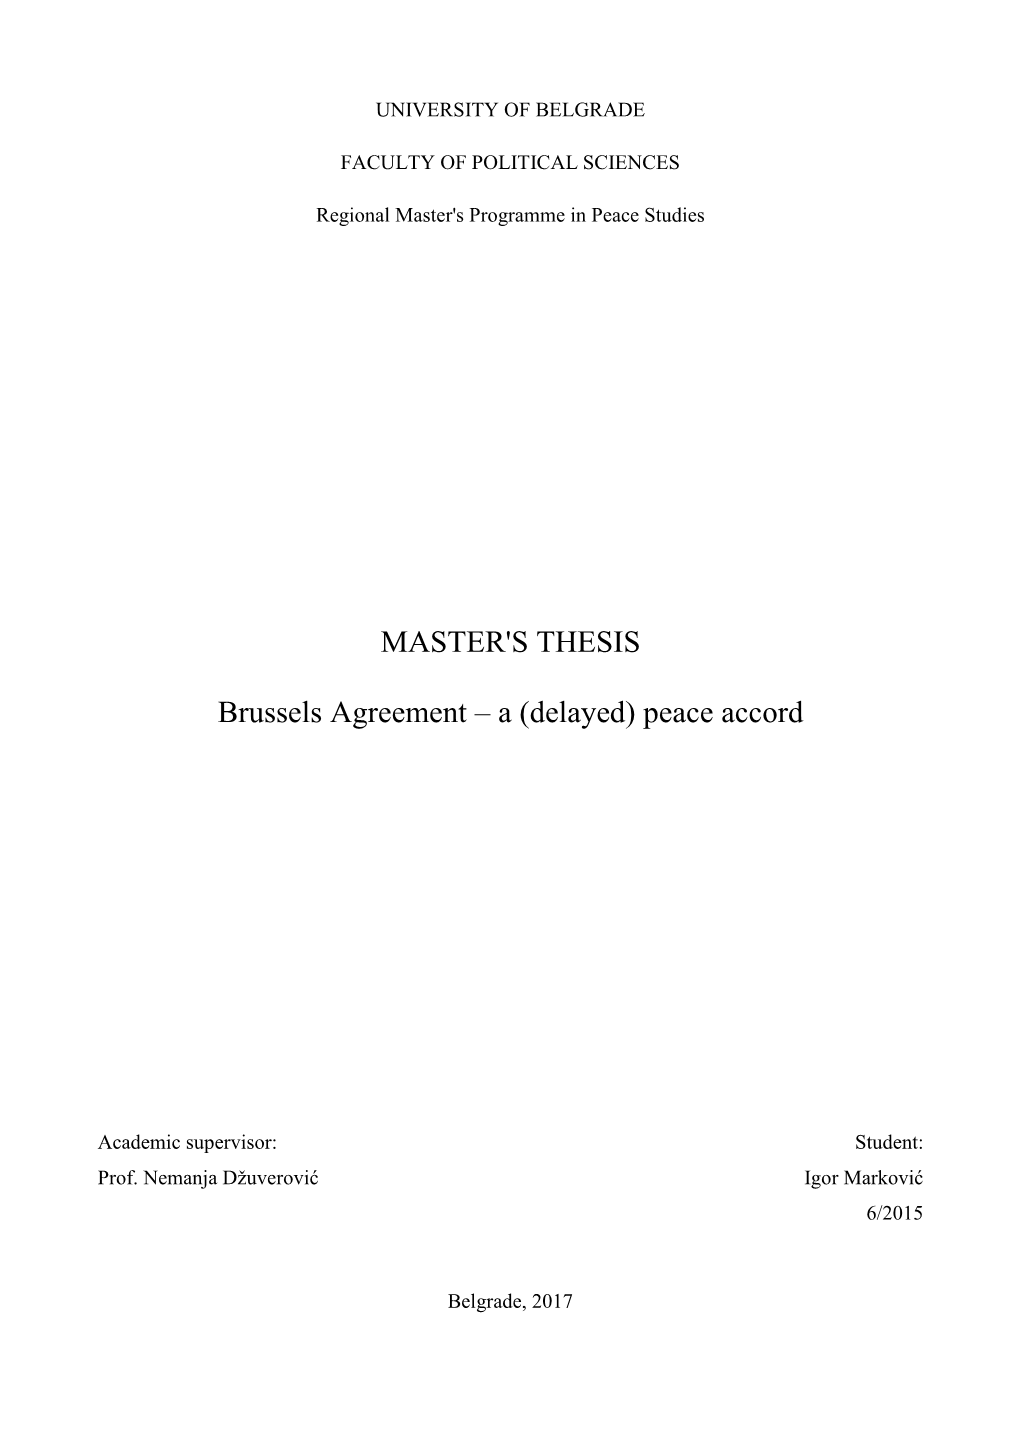 MASTER's THESIS Brussels Agreement – a (Delayed) Peace